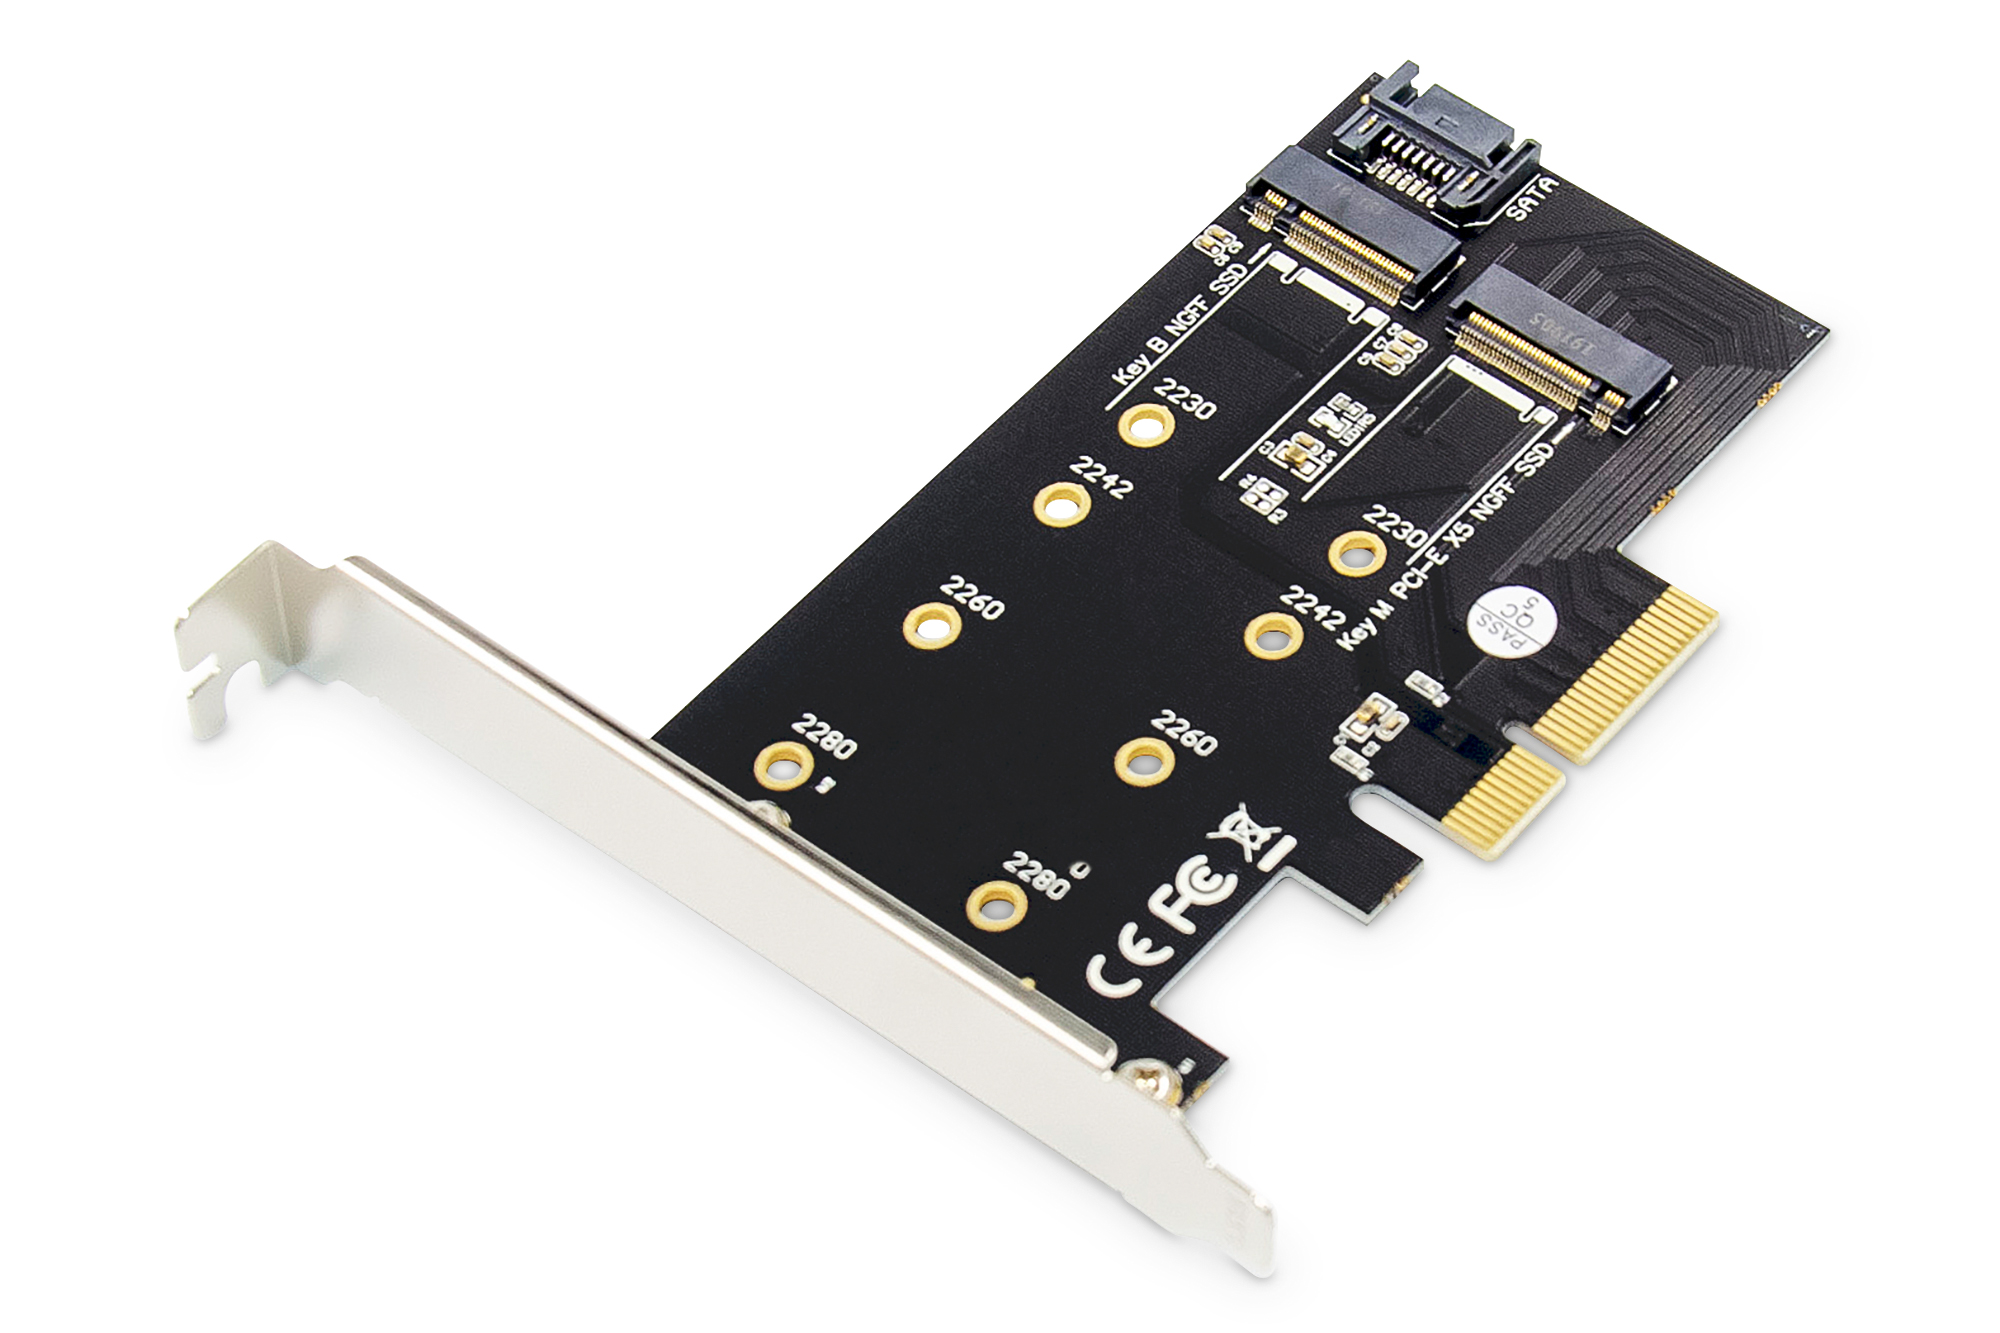 NGFF M.2 NVME SSD SATA SSD to USB3.0 adapter card reader test card